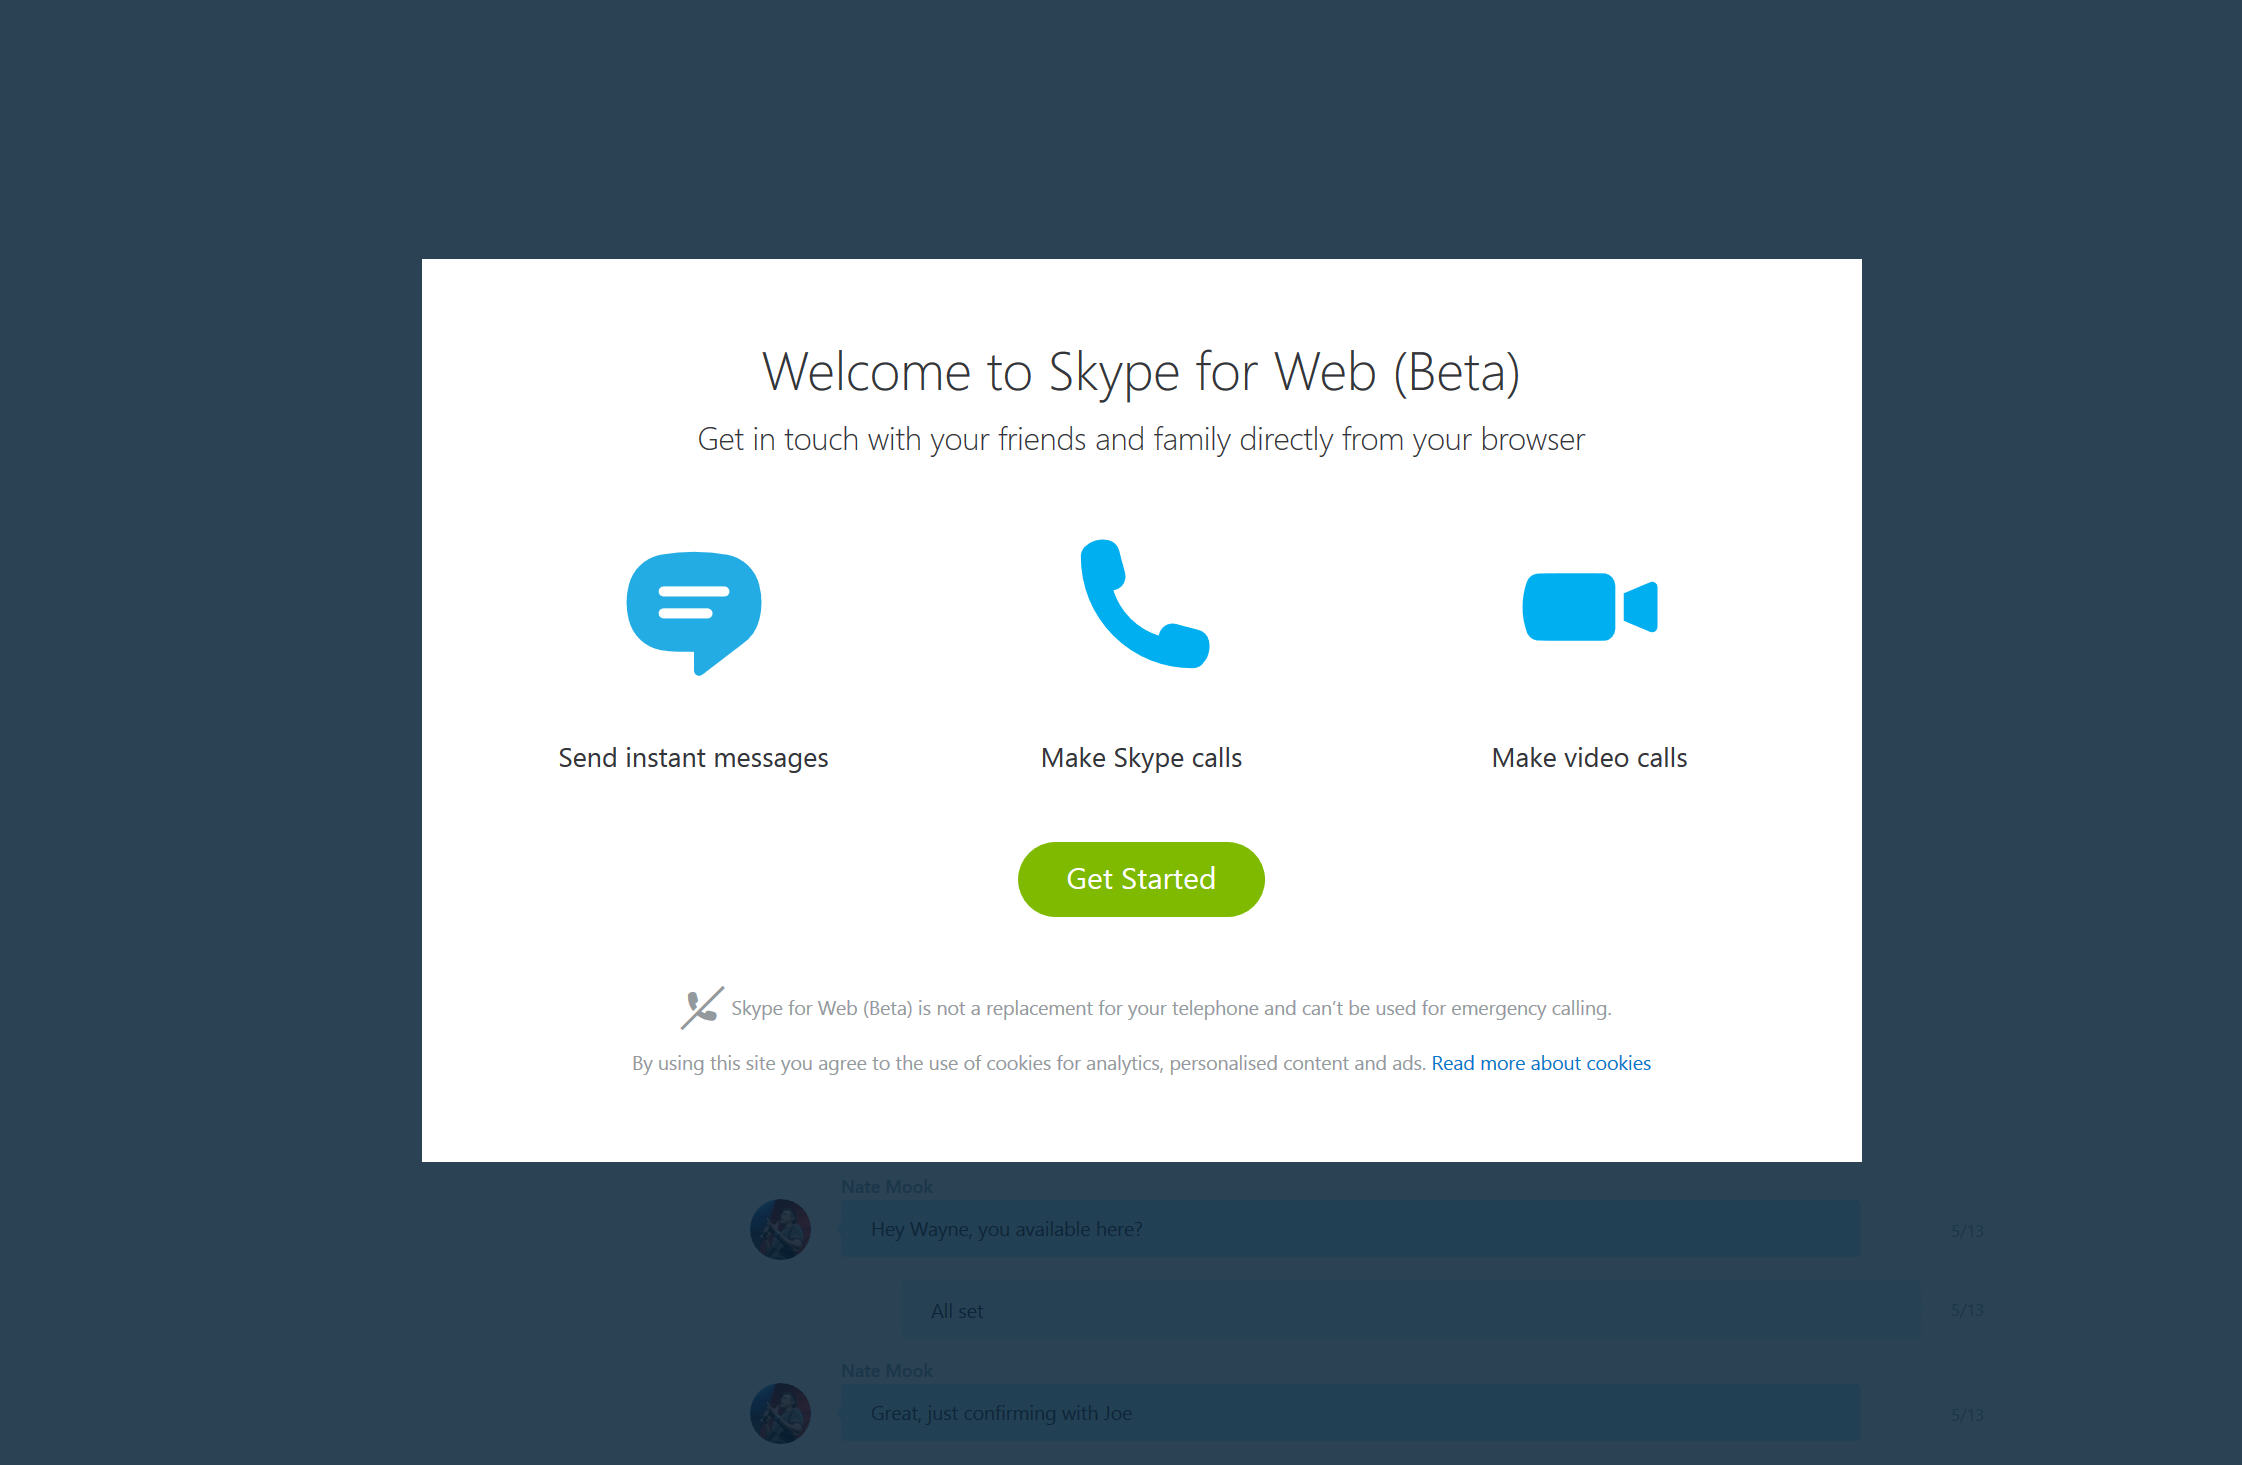 skype for business web